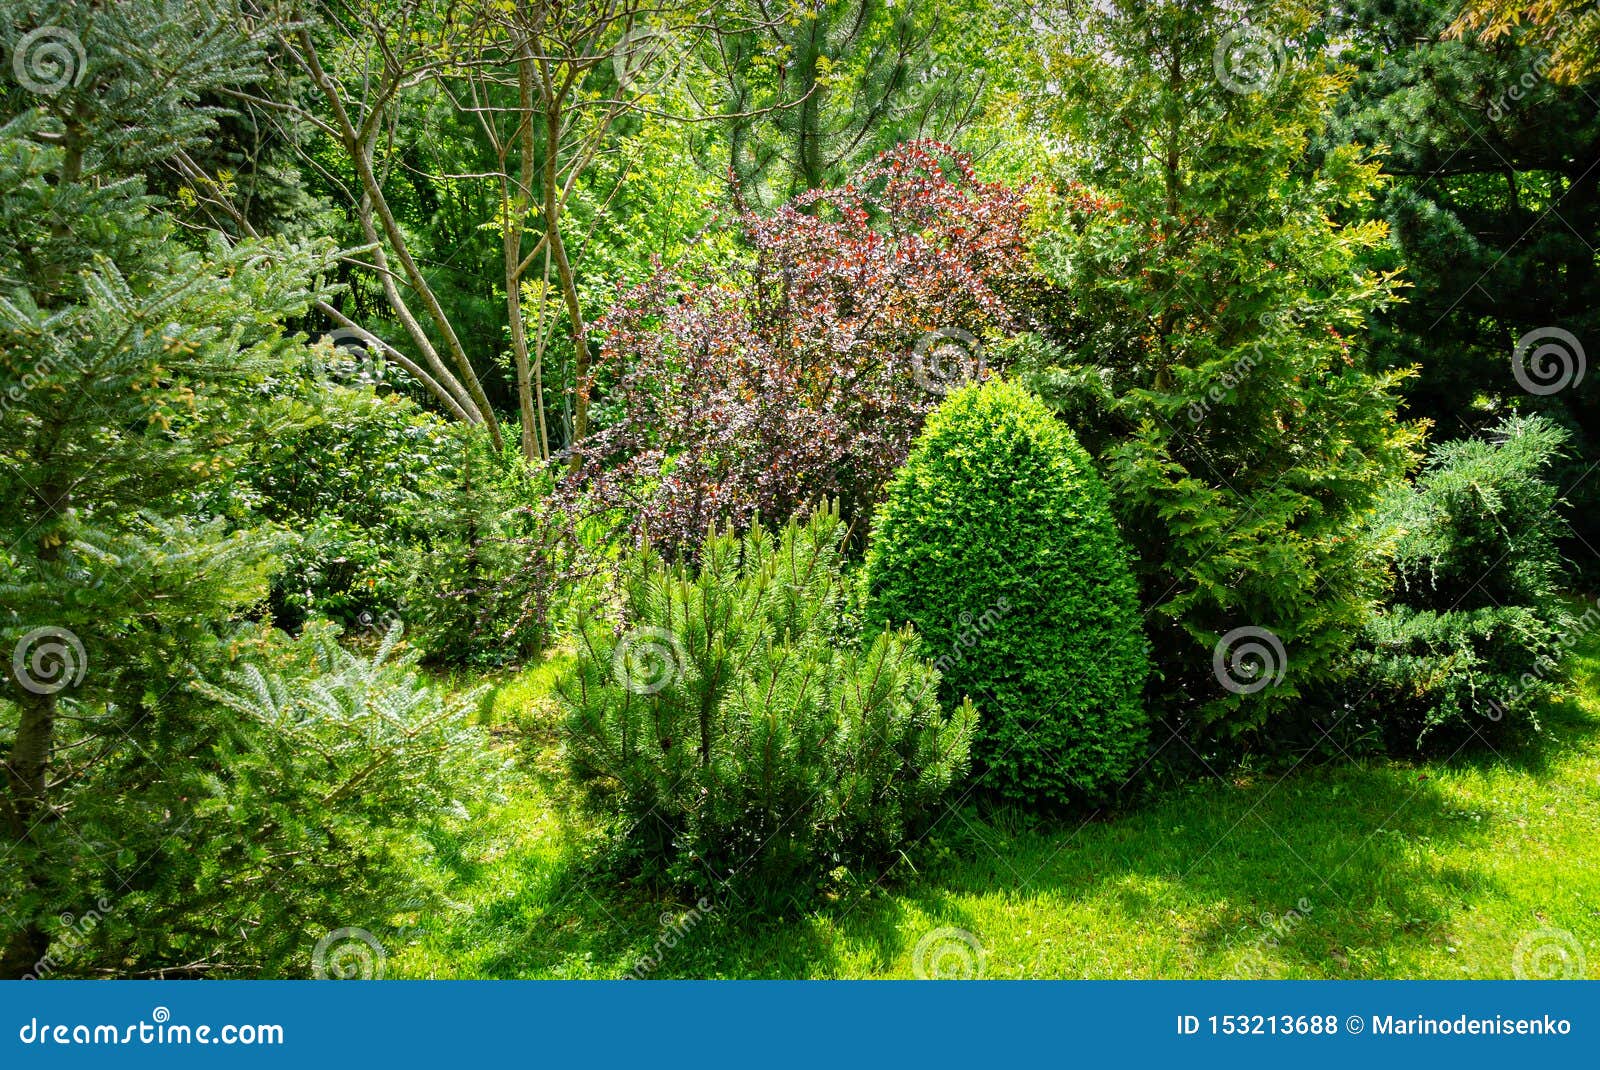 beautiful sunny landscaped garden with evergreens and green lawn. on the left is fir abies koreana silberlocke